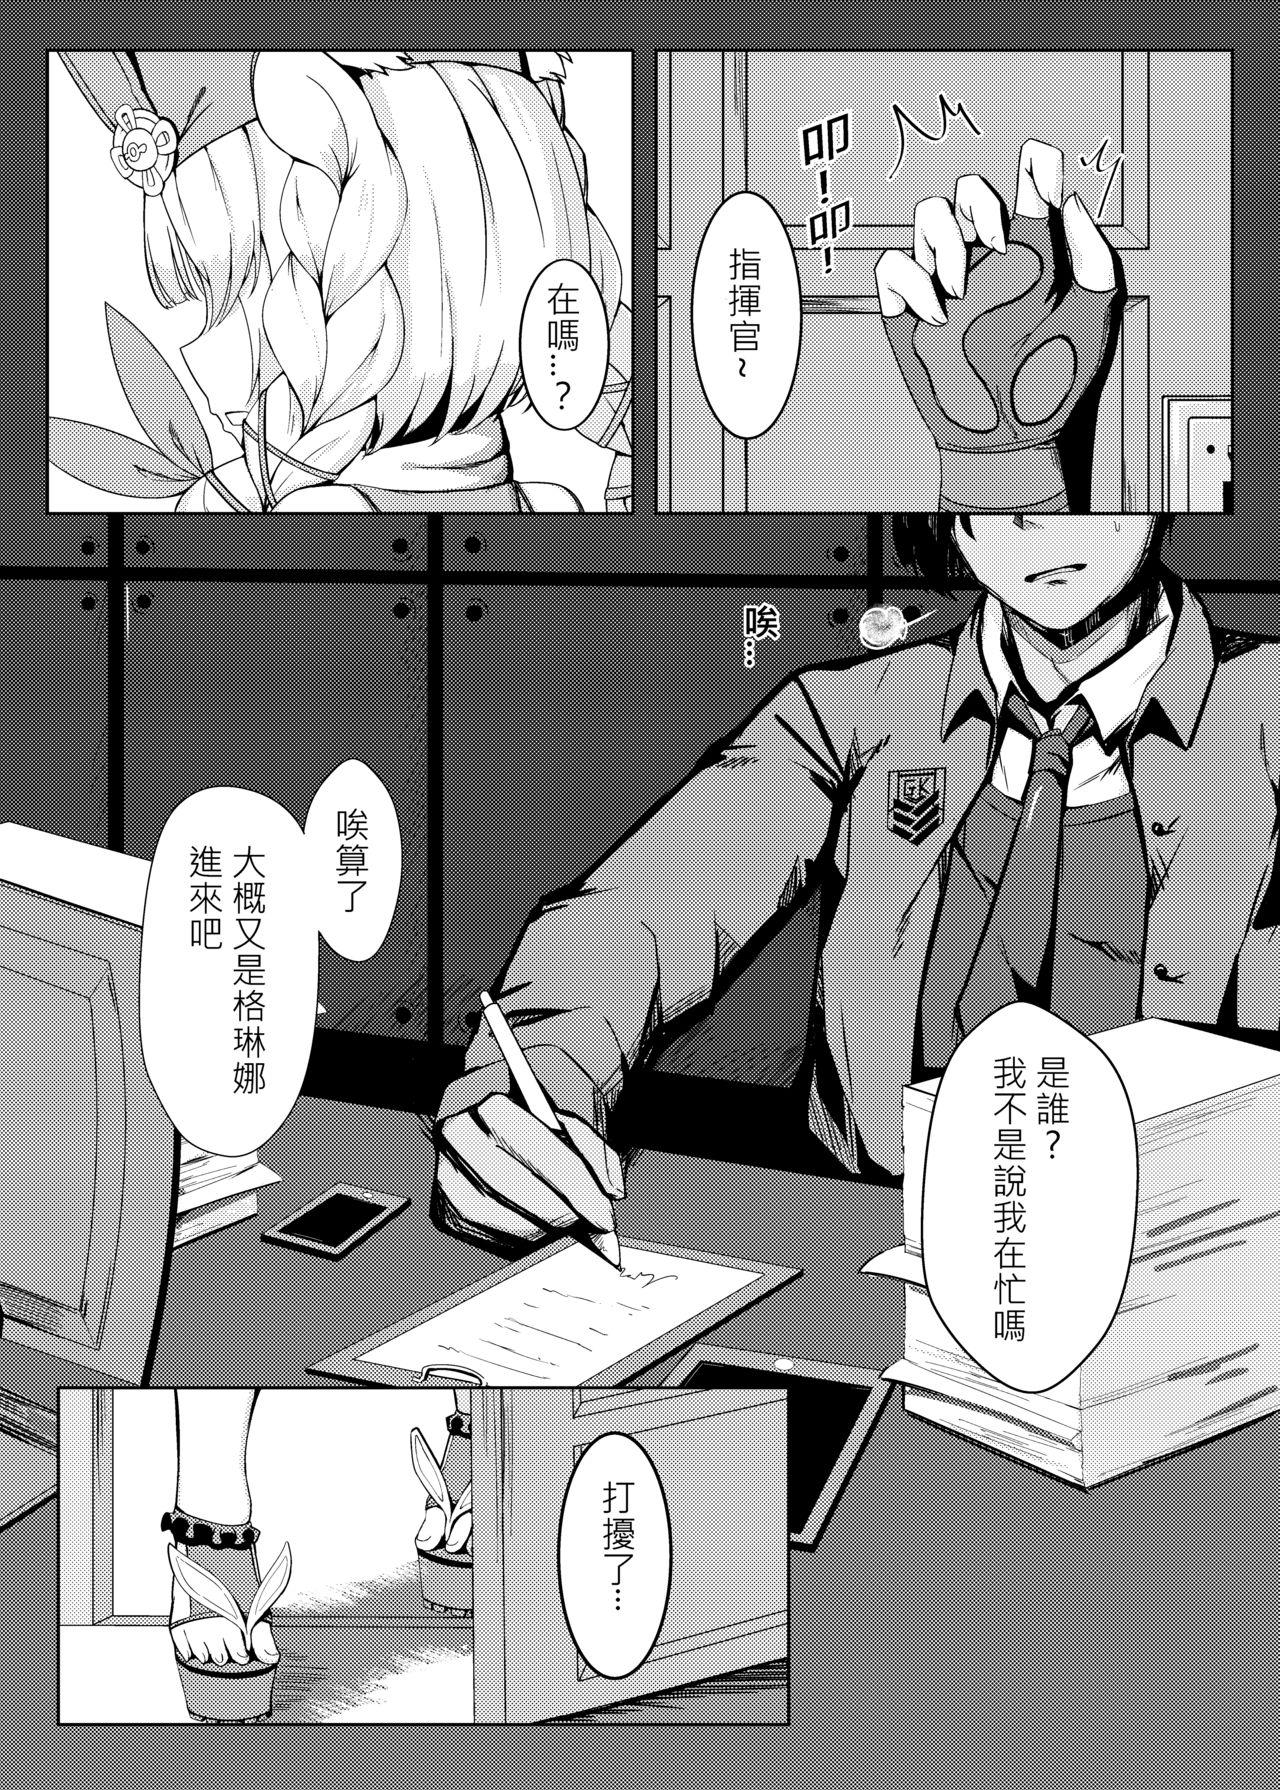 Free Amature Porn Rest with SR-3MP - Girls frontline Vietnam - Page 3